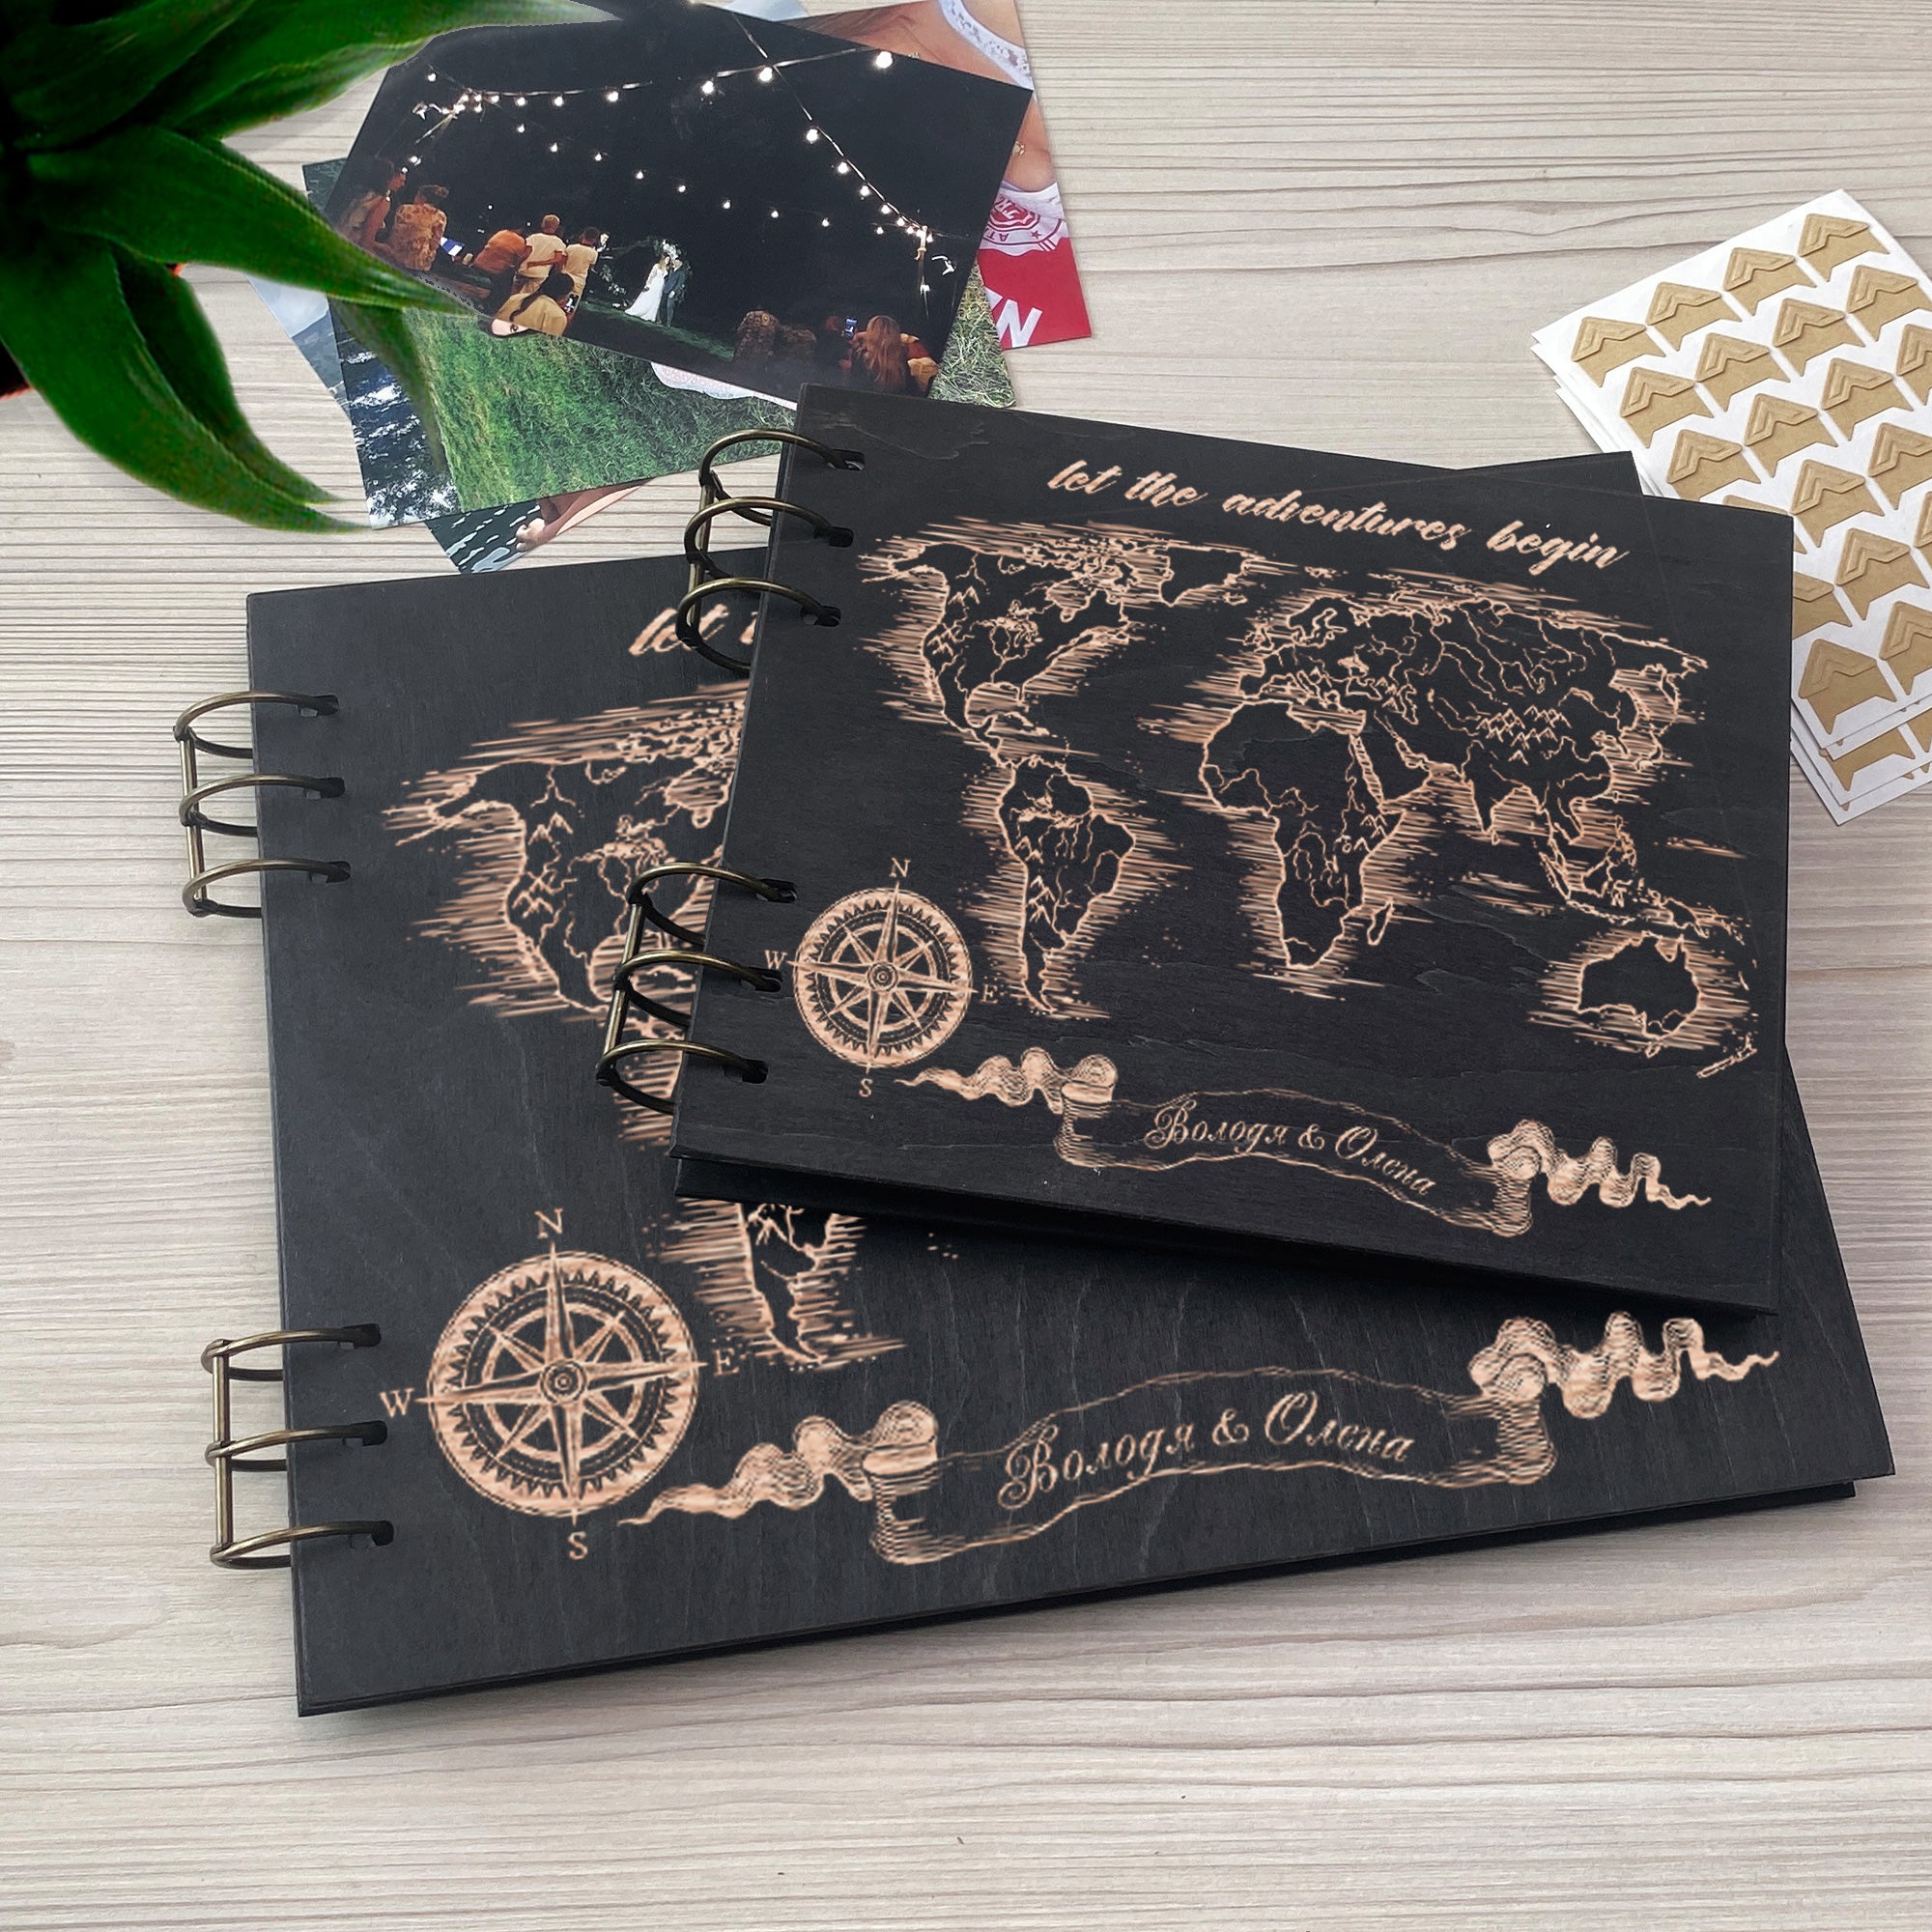 Personalized photo album cover and Map_mountain engraving – skinwoodukraine